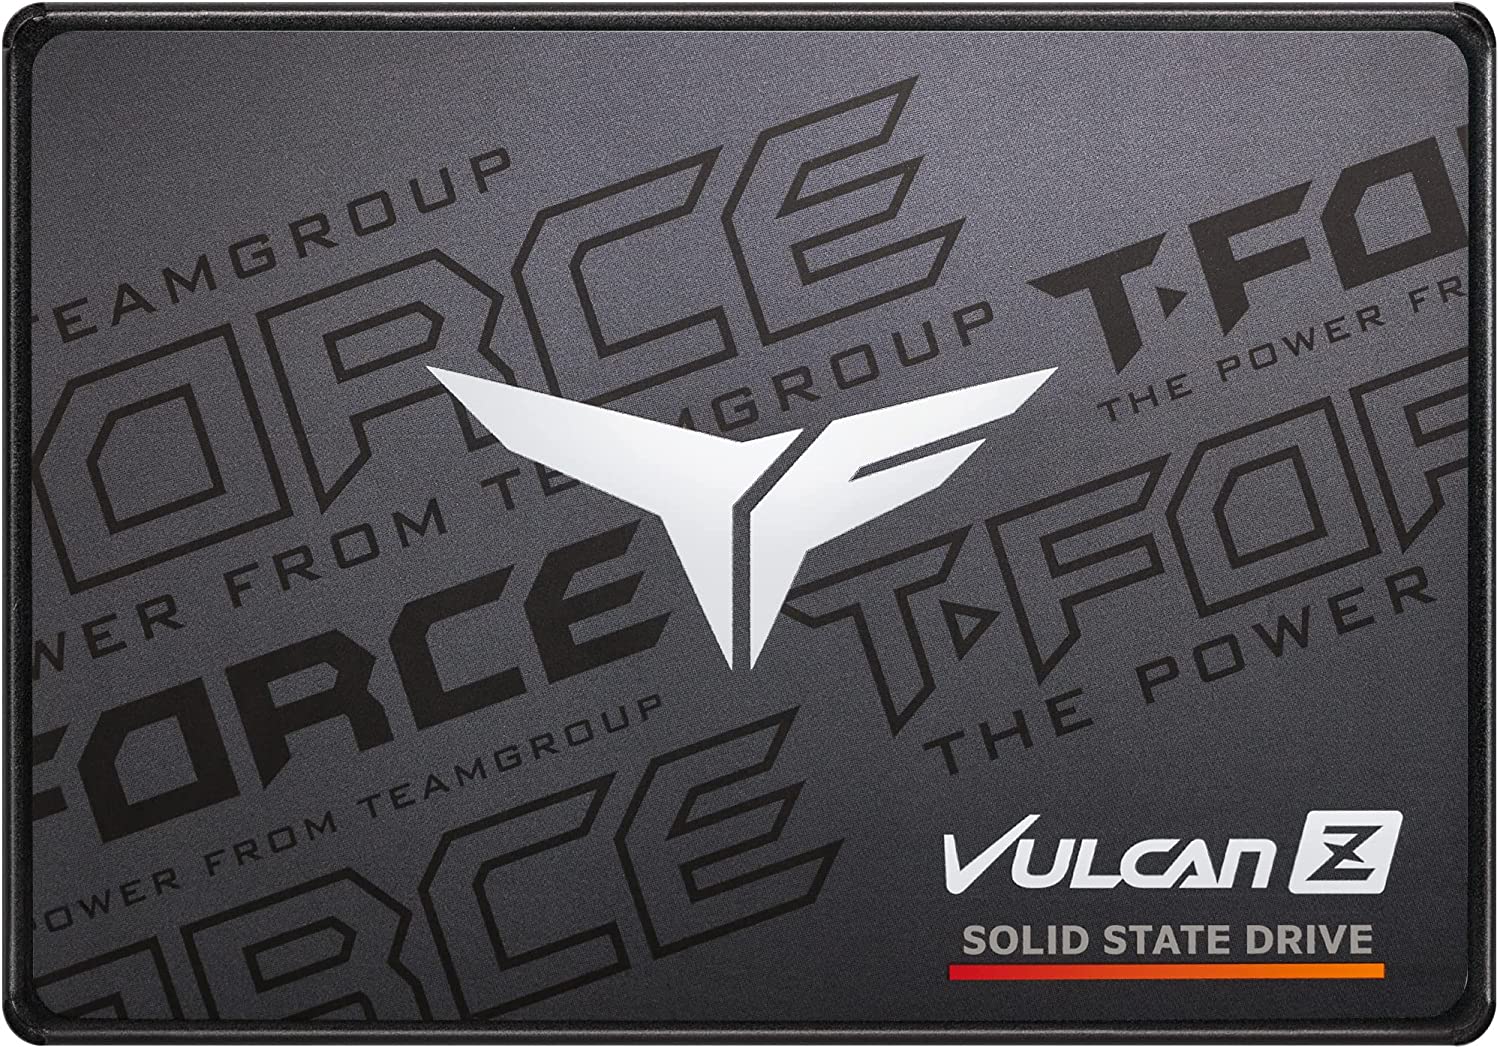 2TB TeamGroup T-Force Vulcan Z SLC Cache 3D NAND TLC 2.5 Inch SATA III Internal SSD $68, More + Free Shipping